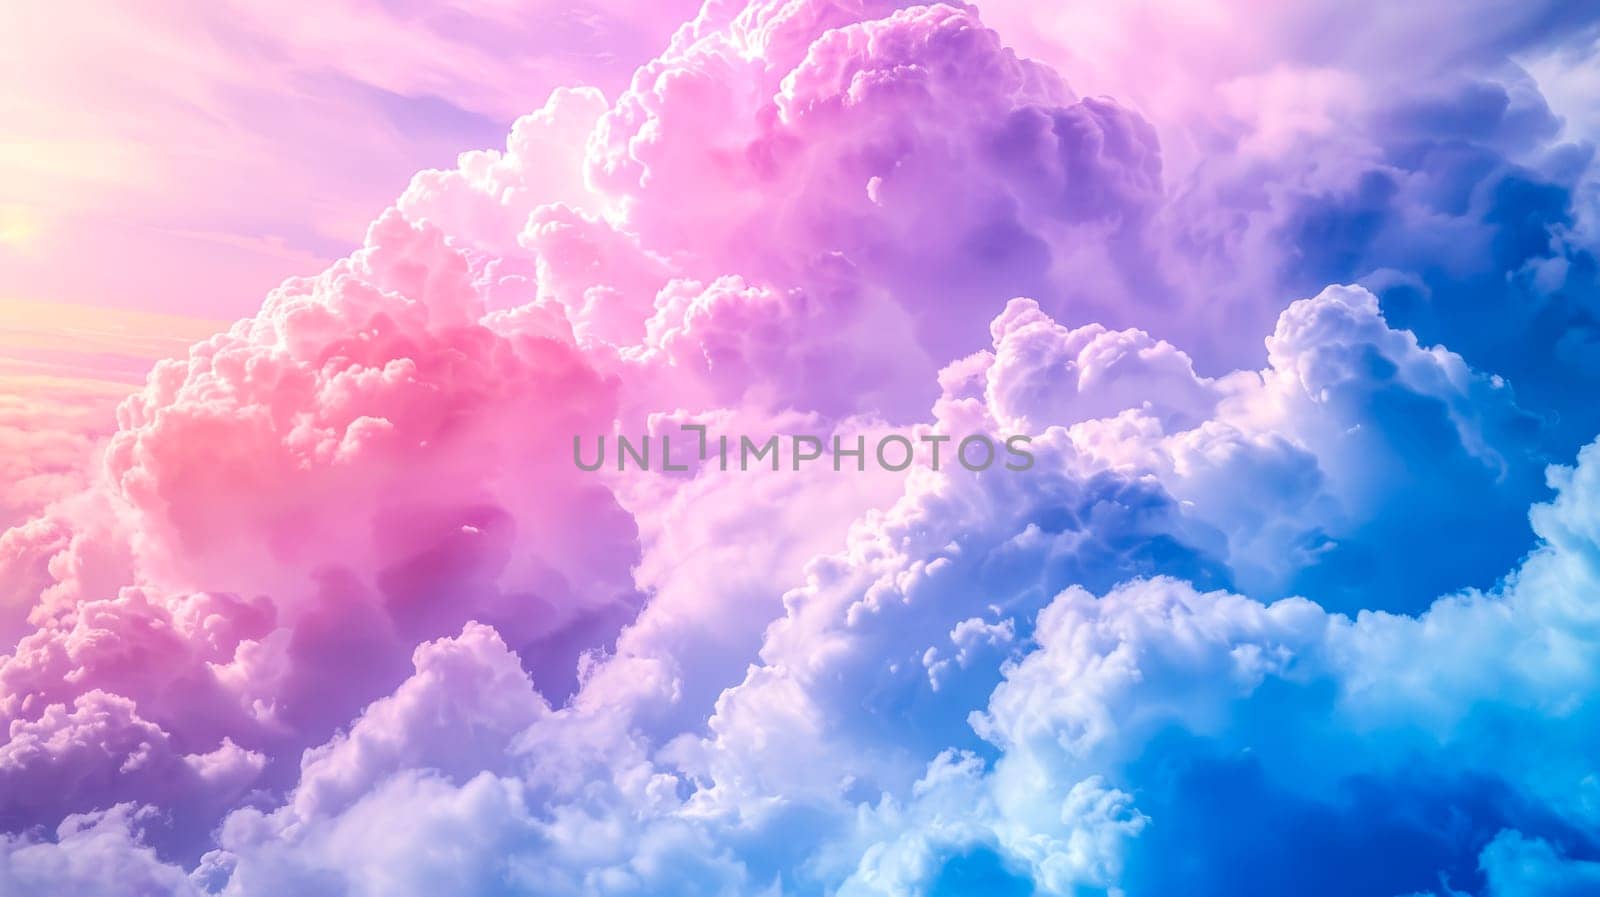 Stunning display of colorful clouds illuminated by the sunset, creating a dreamlike atmosphere